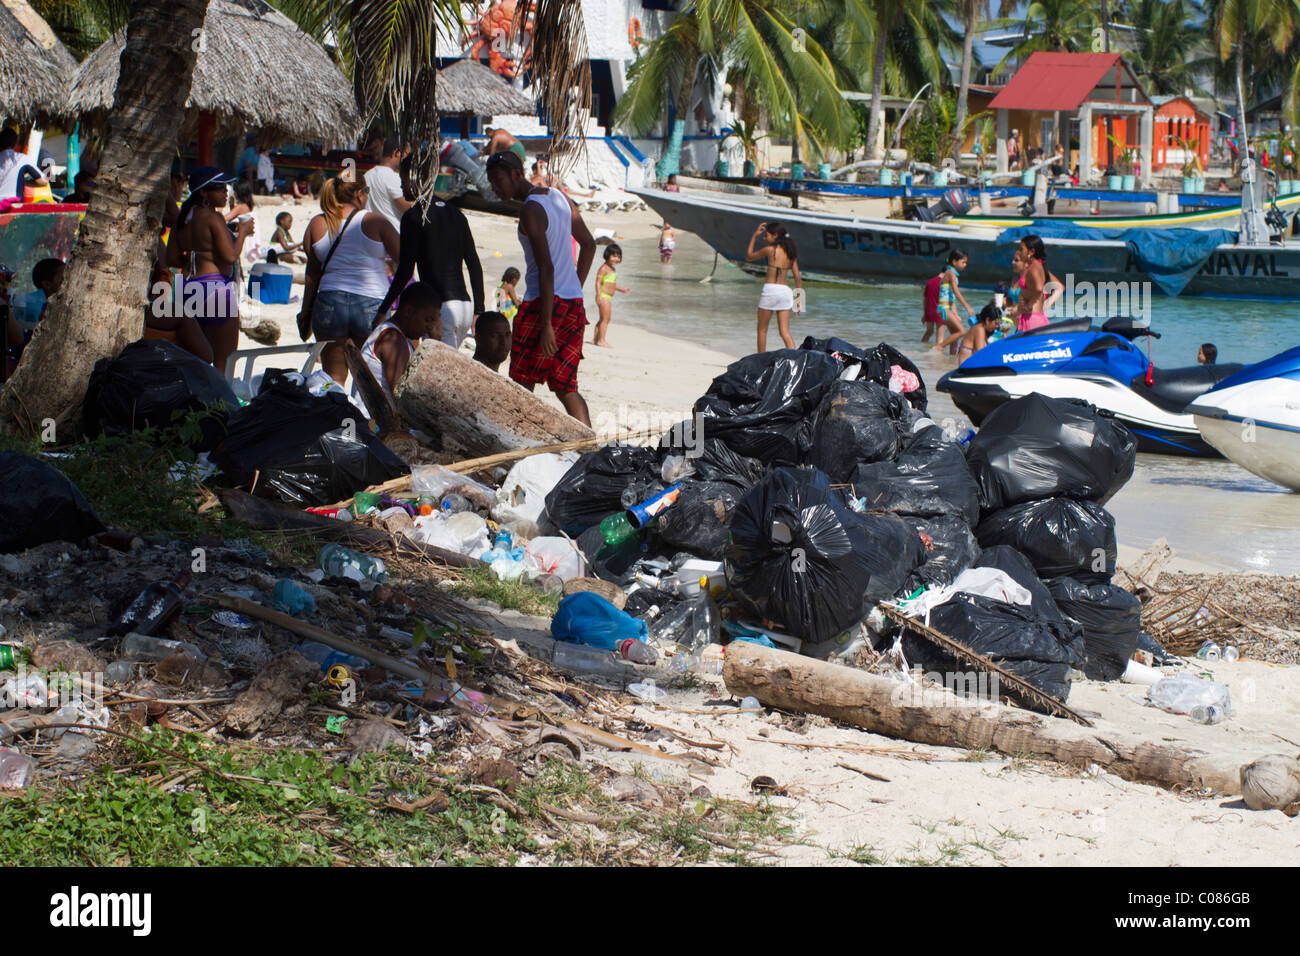 A pile of garbage bags on Isla Grande's beaches near the tourists. Colon, Republic of Panama, Central America Stock Photo